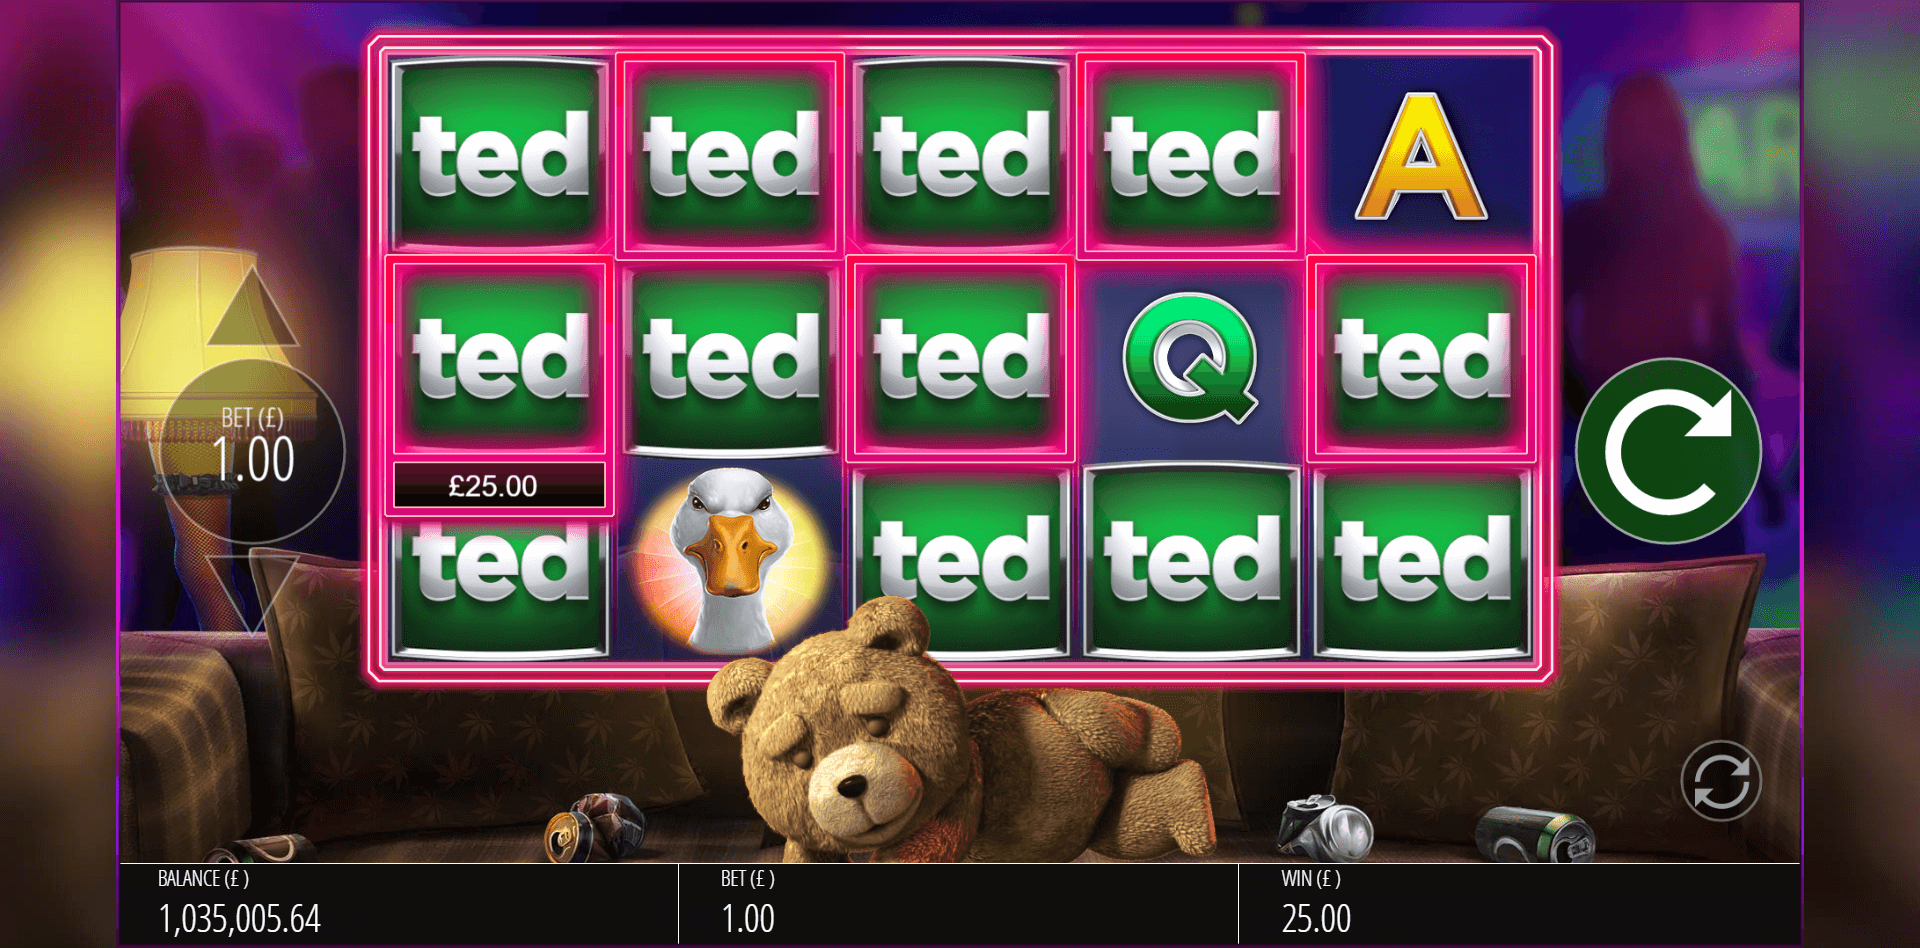 Ted 7